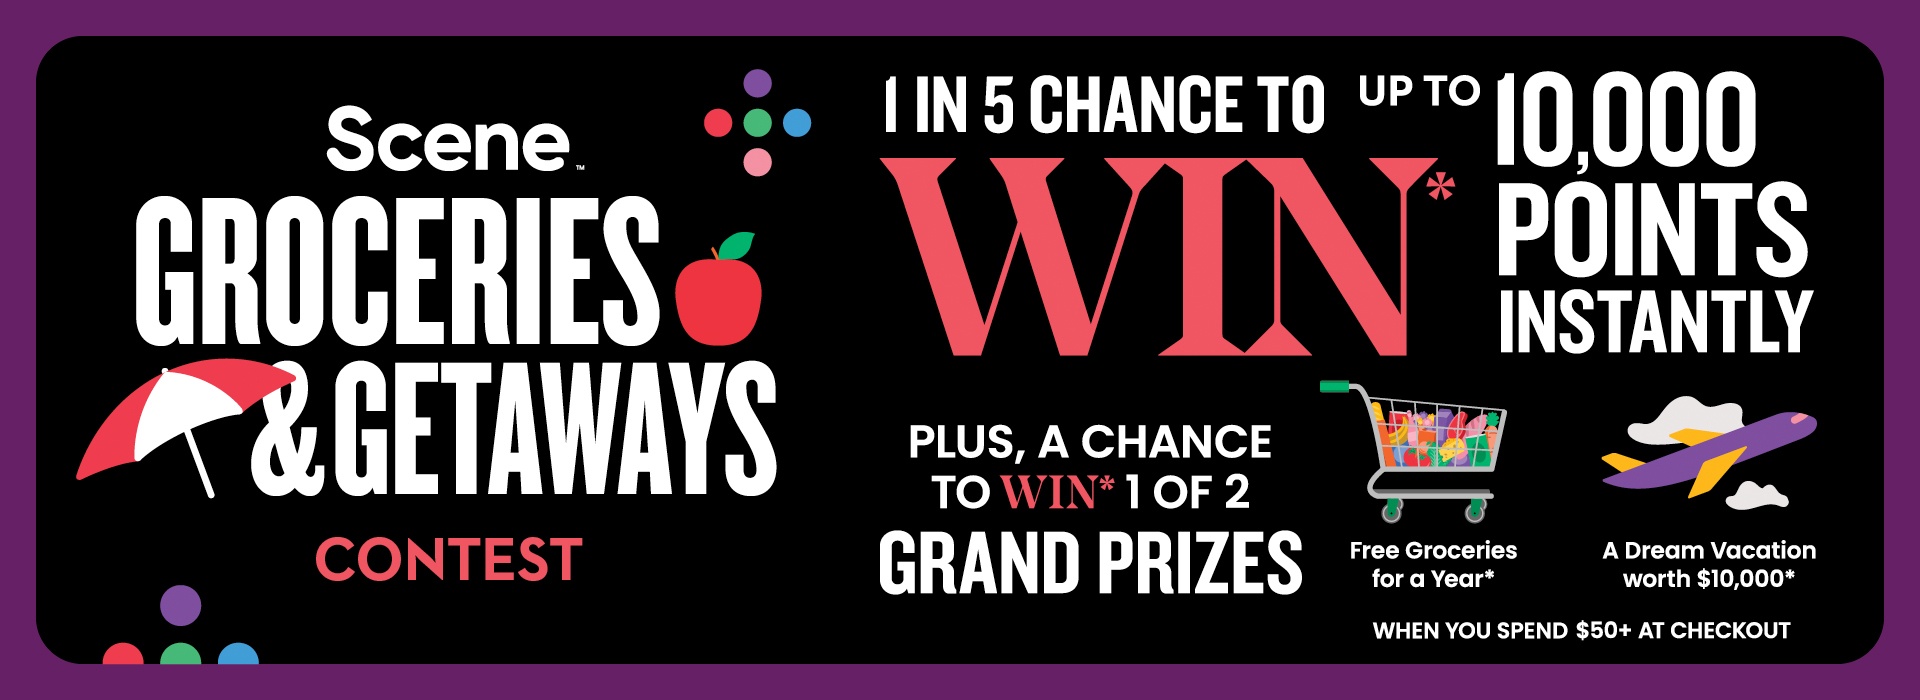 This image has the following text, "Scene Groceries & Getaways Contest. 1 in 5 chance to win up to 10,000 points instantly. Plus, a chance to Win* 1 of 2 grand prizes - Free groceries for a year or A dream vacation worth $10,000* when you spend $50+ at checkout."